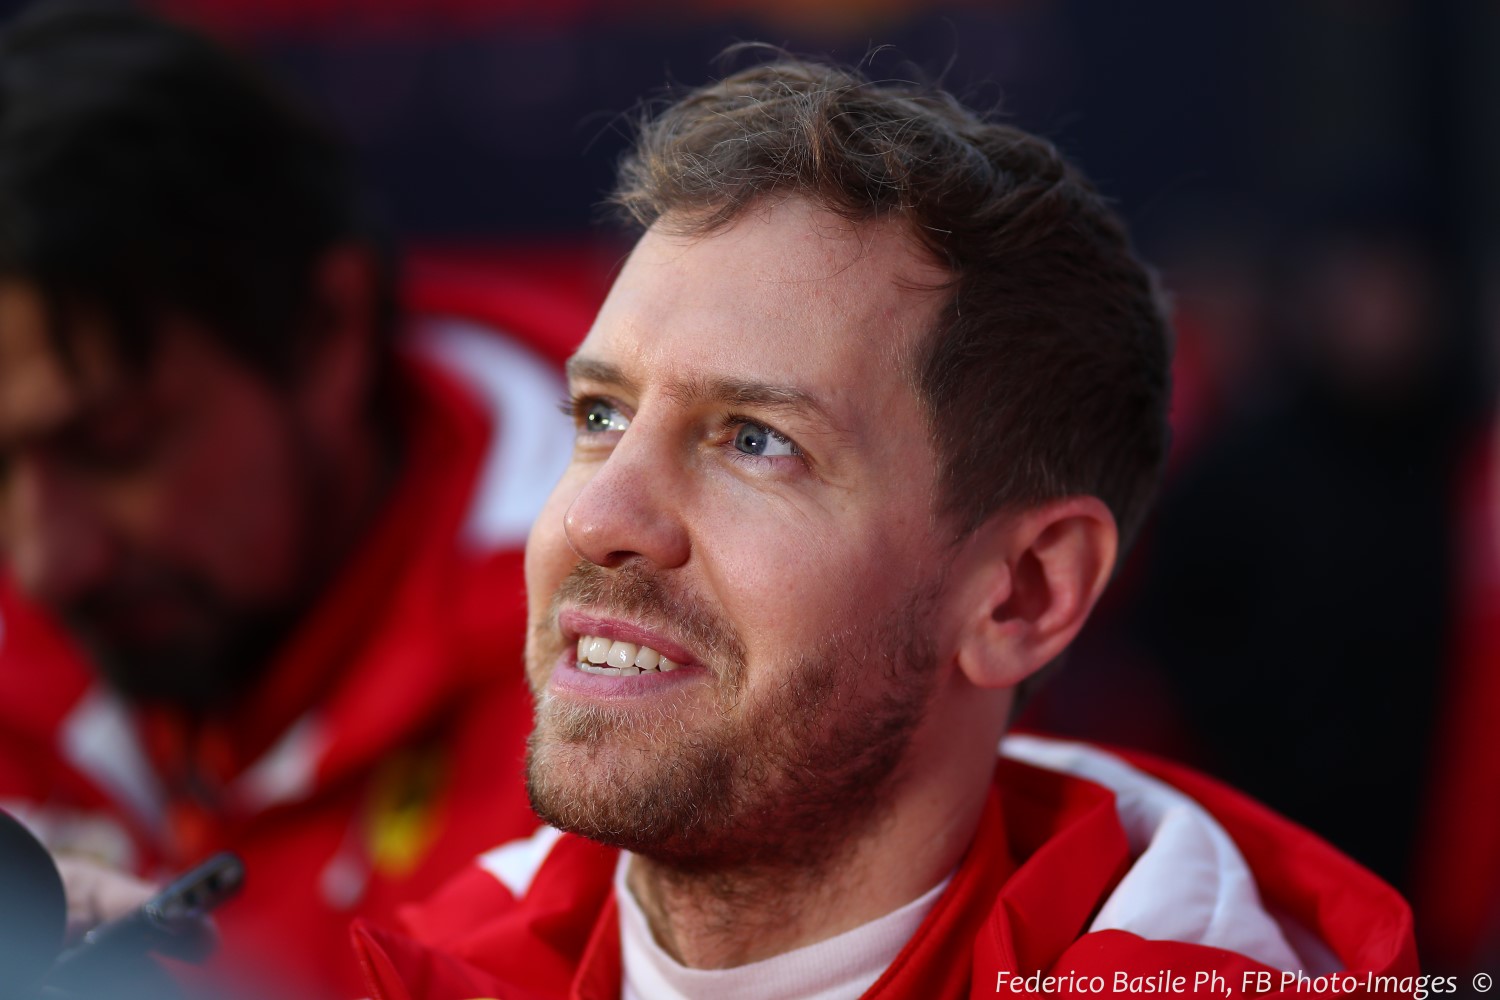 Mental errors have ruined Vettel's hope at a title